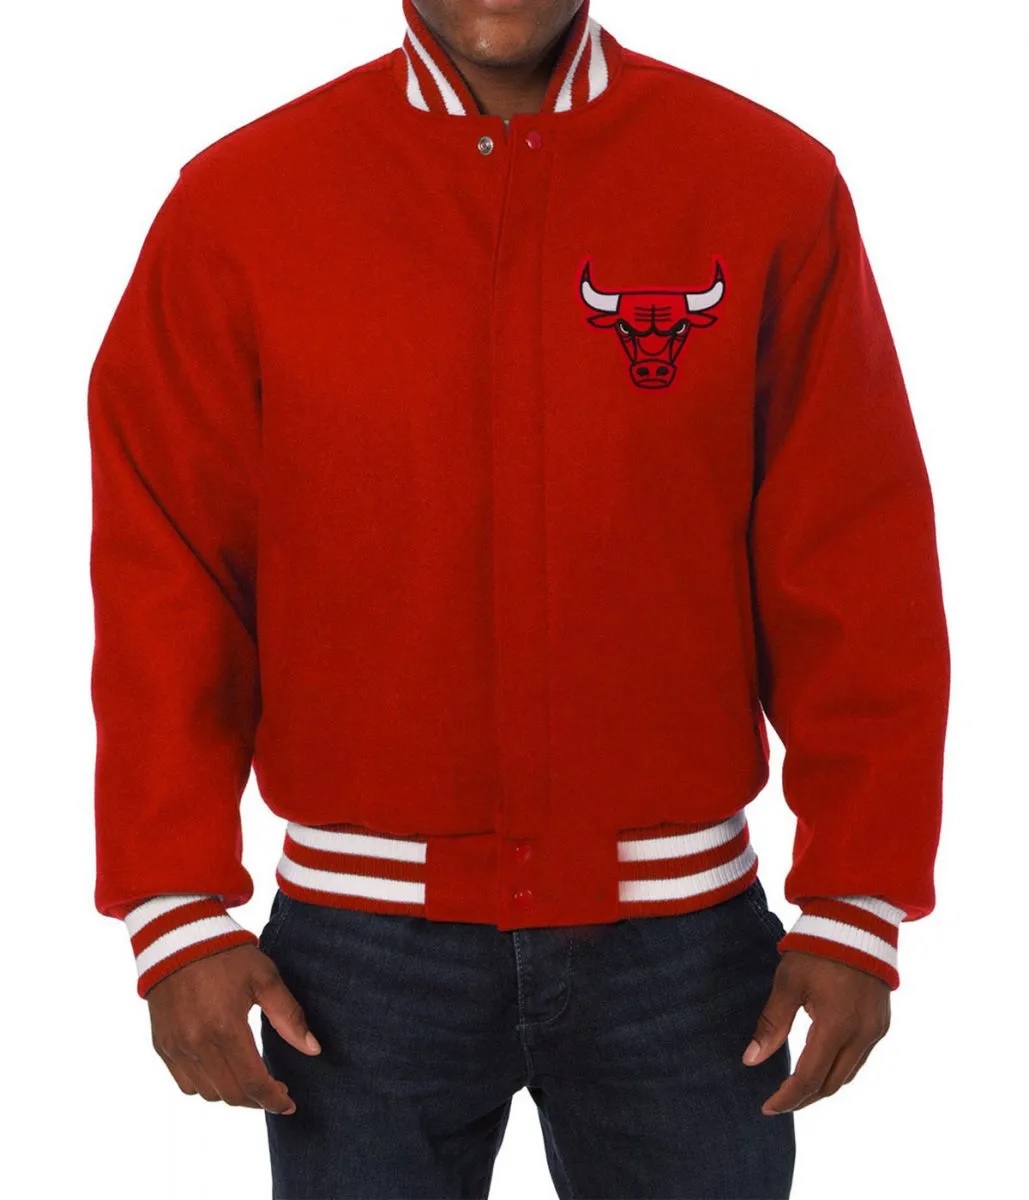 Varsity Chicago Bulls Embroidered Wool Red Jacket